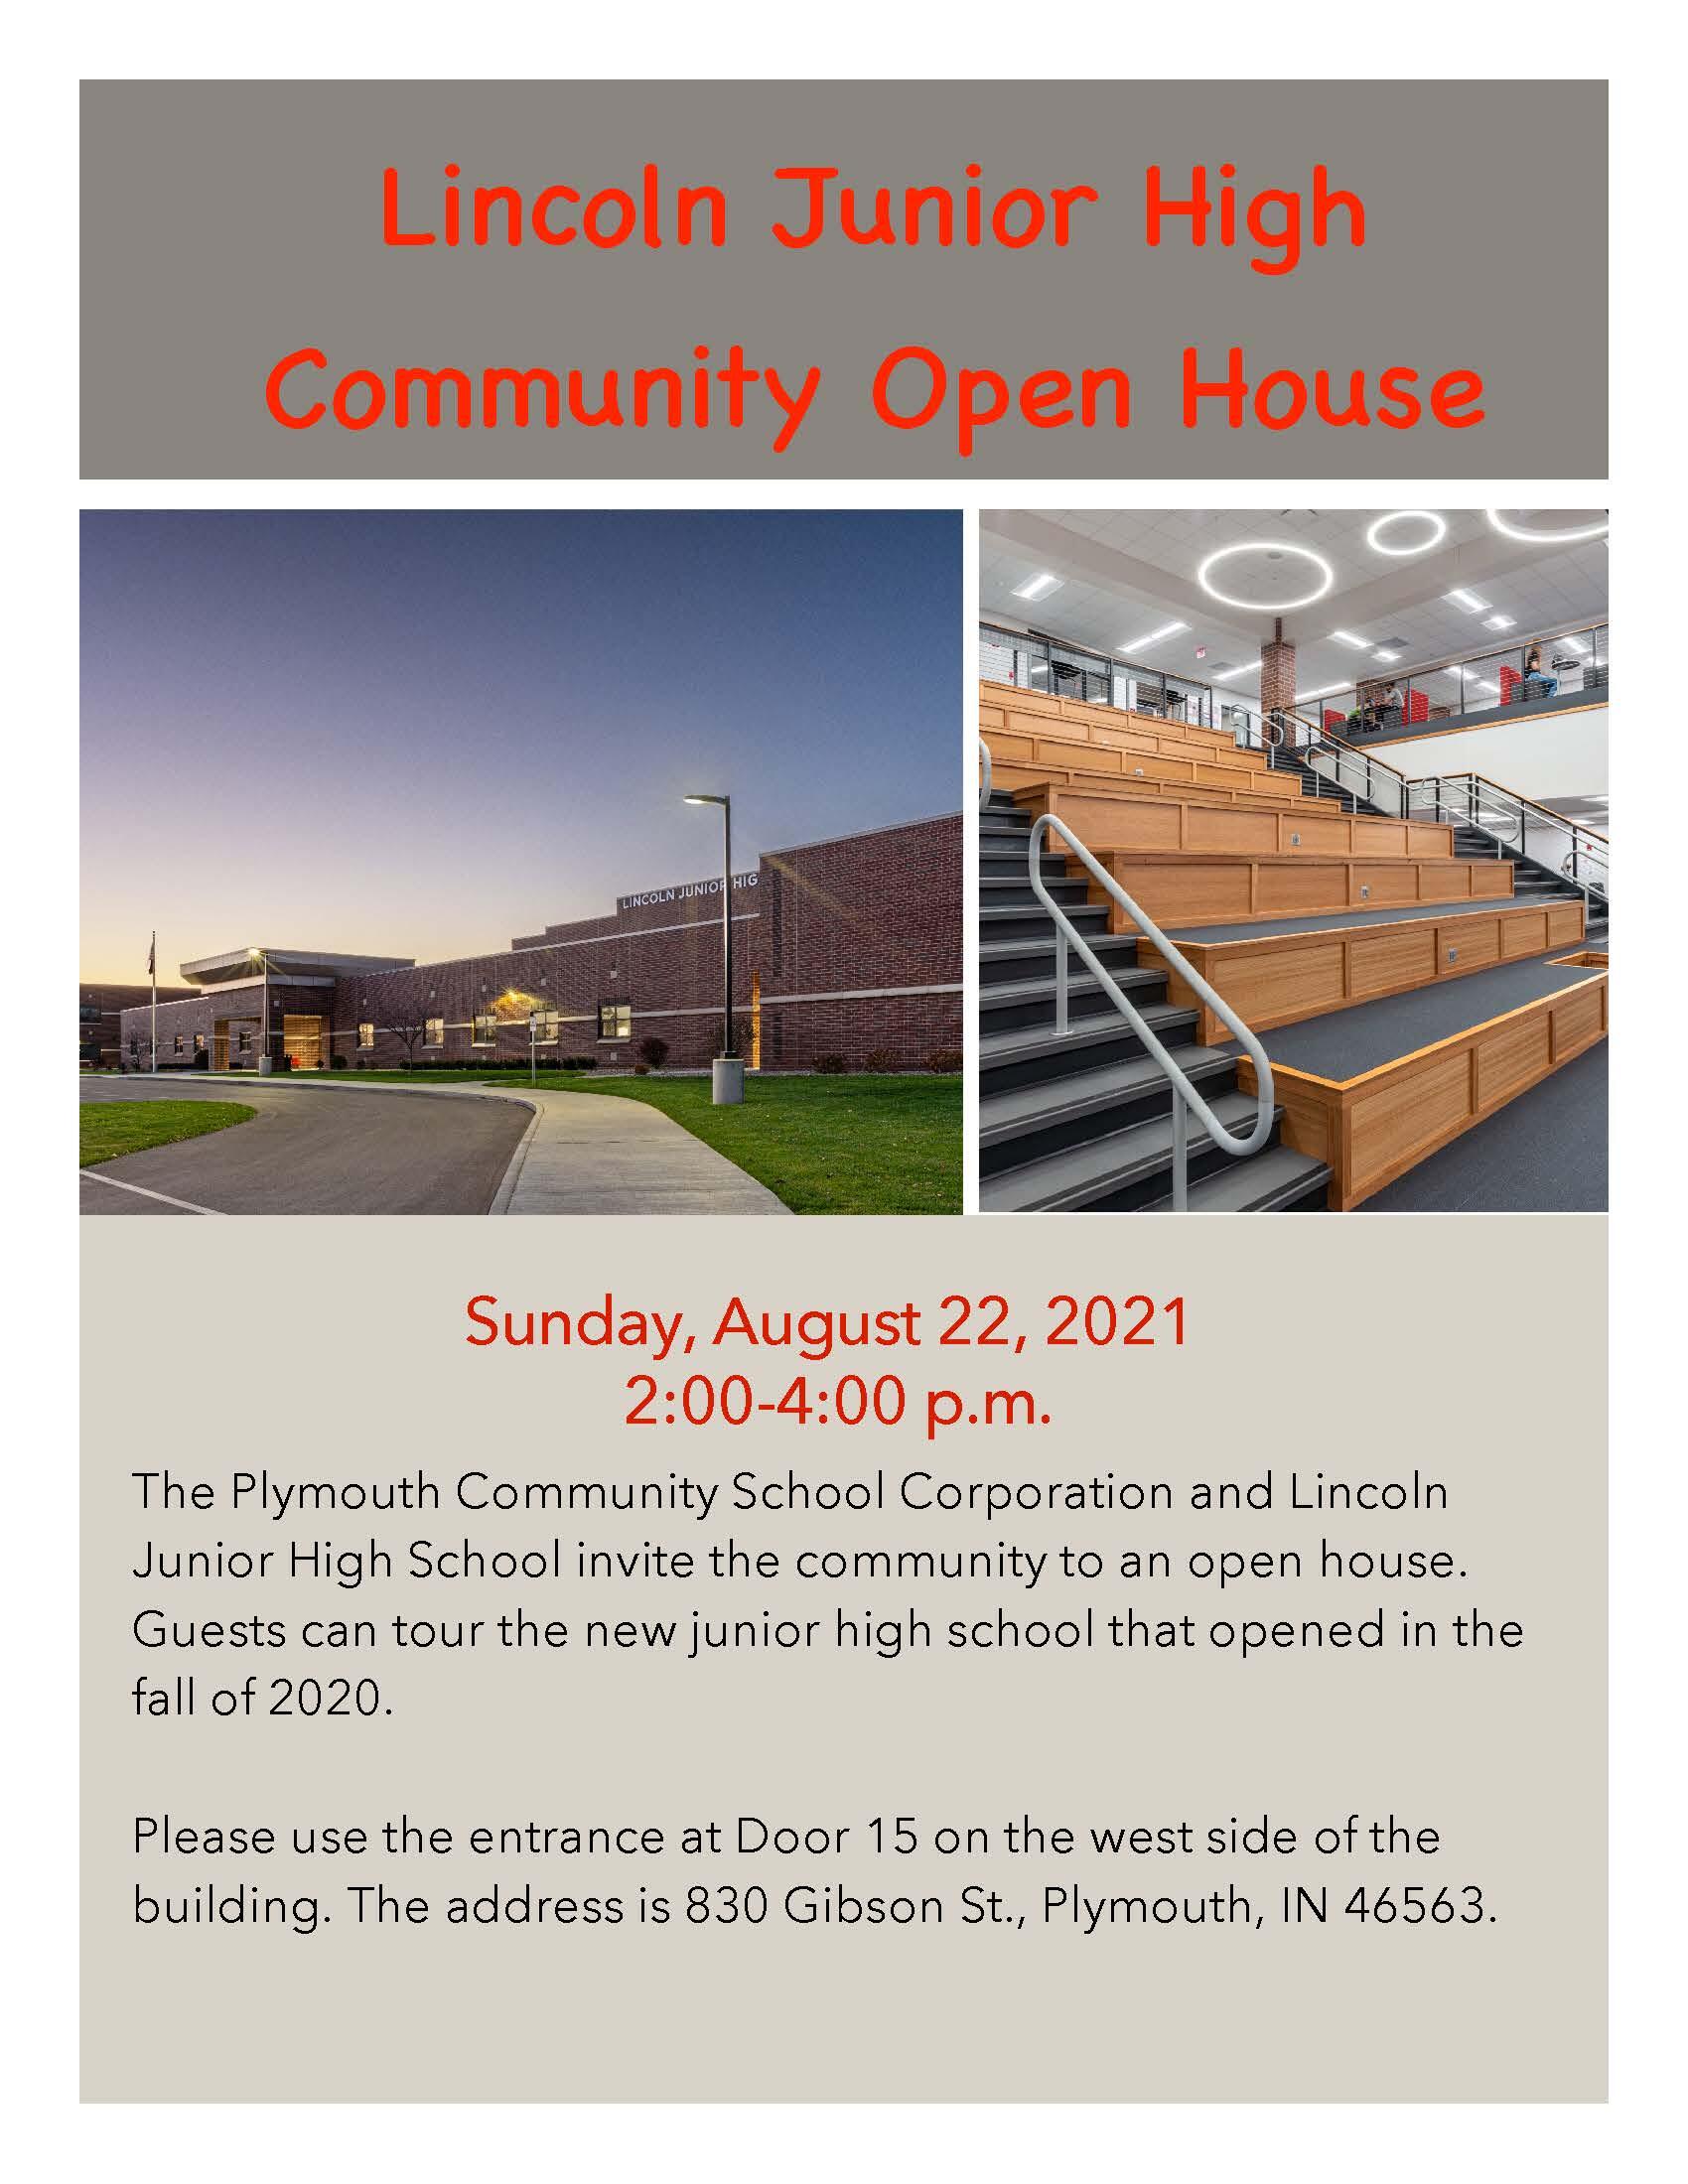 Sunday, August 22, 2021  2:00-4:00 p.m.  The Plymouth Community School Corporation and Lincoln Junior High School invite the community to an open house. Guests can tour the new junior high school that opened in the fall of 2020.  Please use the entrance at Door 15 on the west side of the building. The address is 830 Gibson St., Plymouth, IN 46563. 